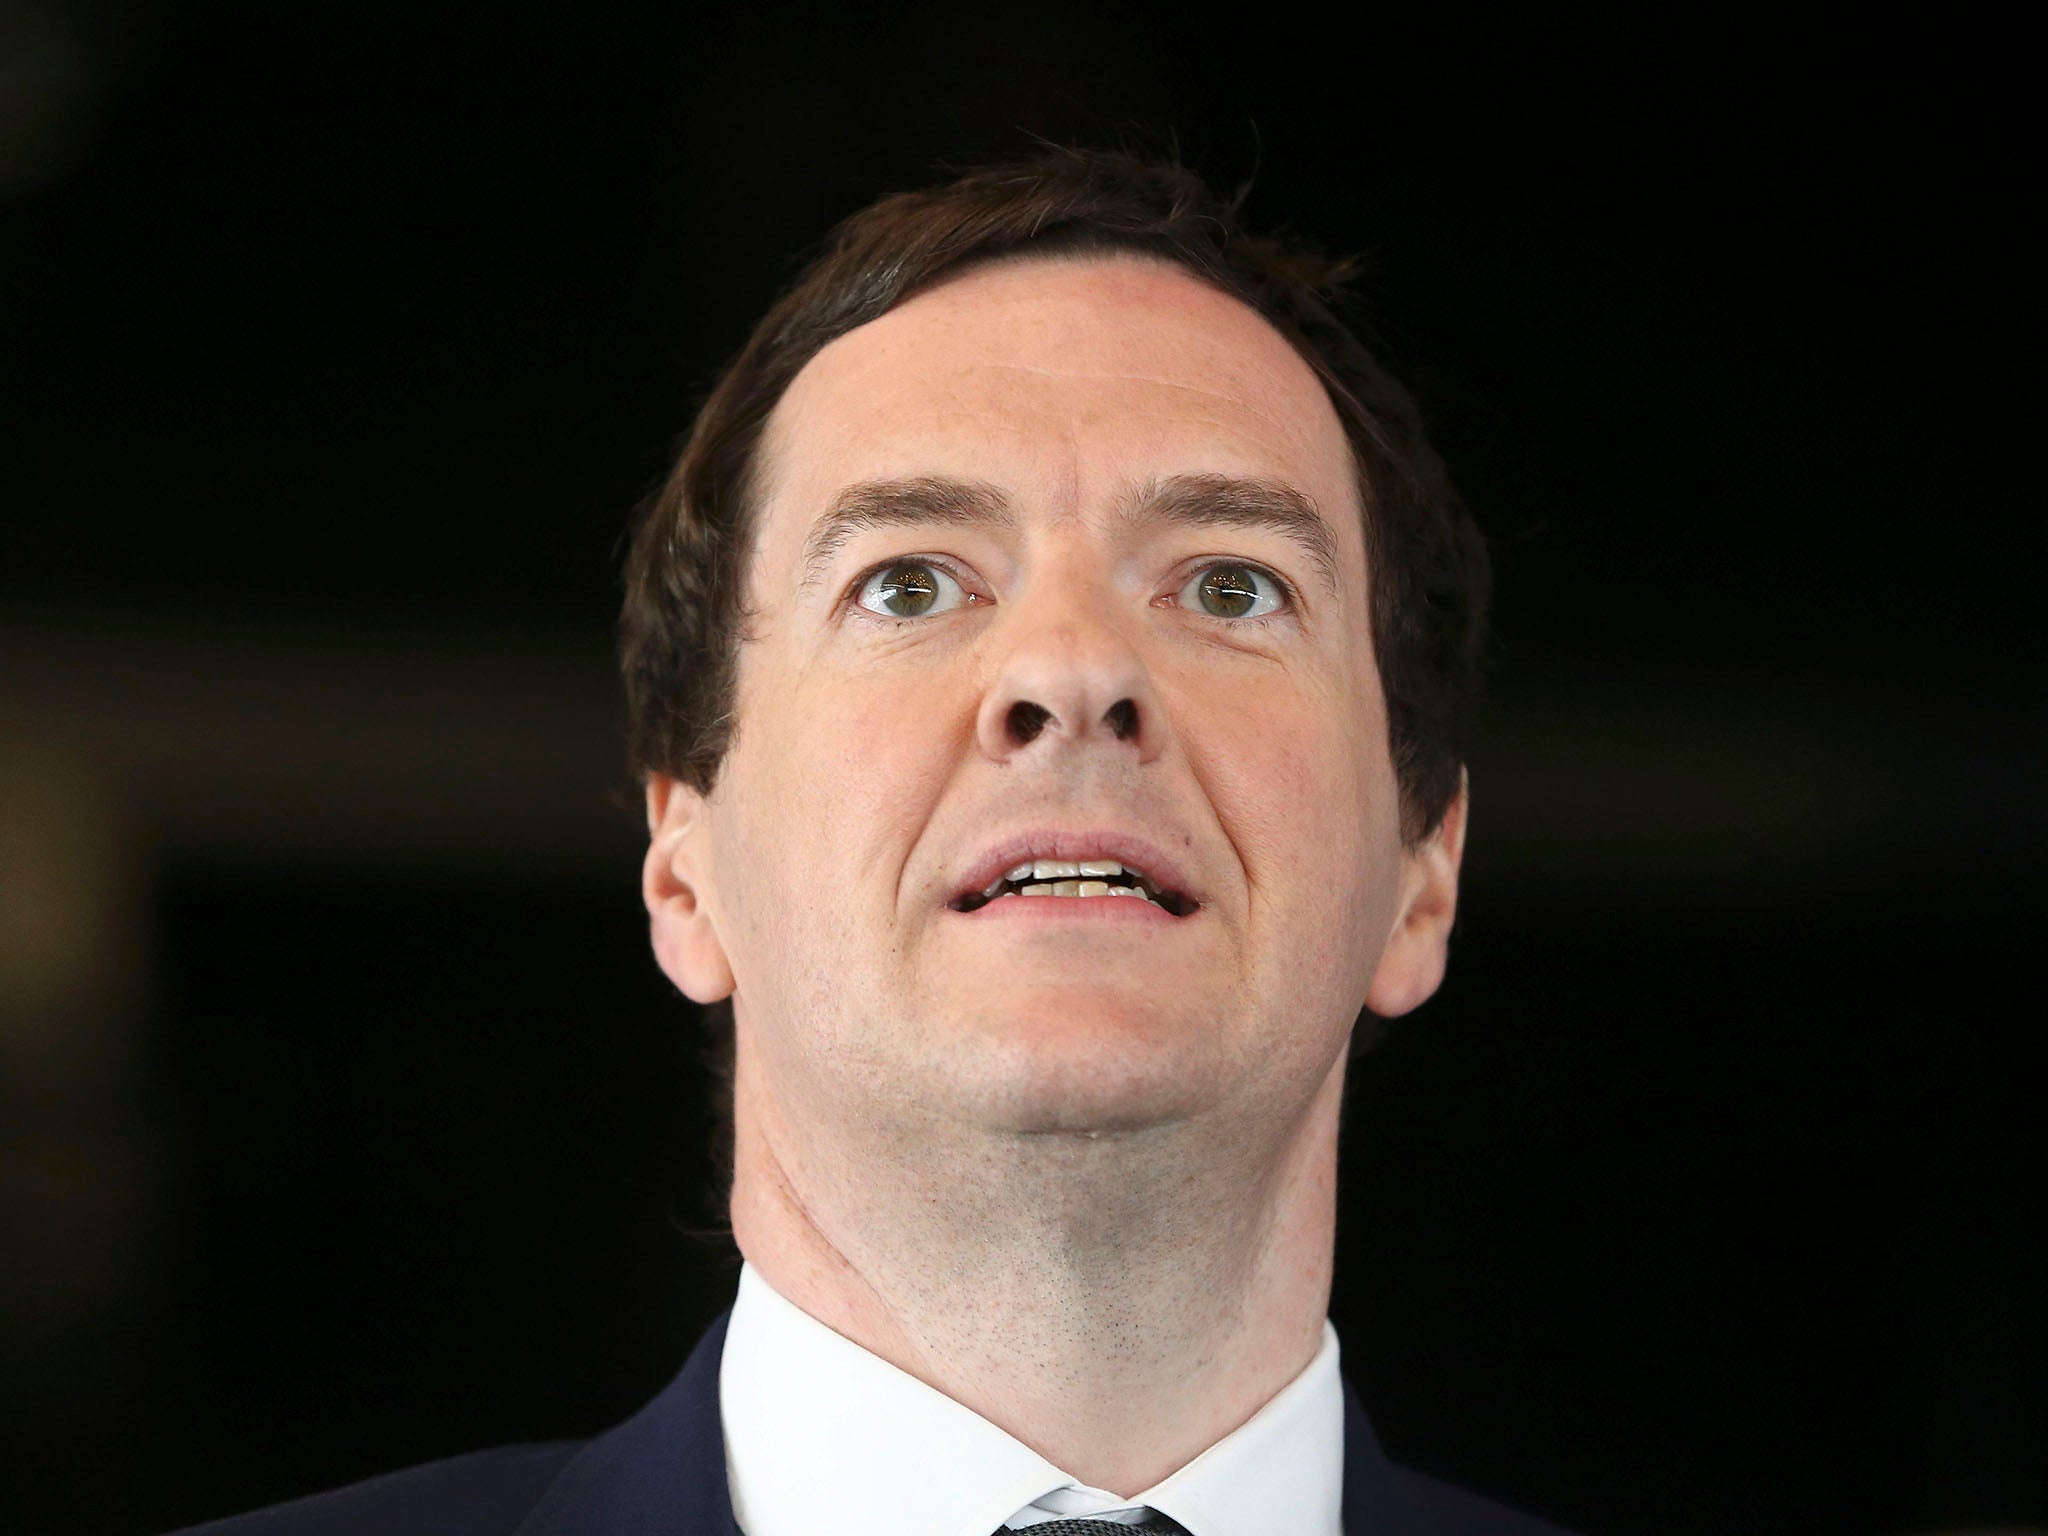 After six years at the Treasury, George Osborne is no longer Chancellor